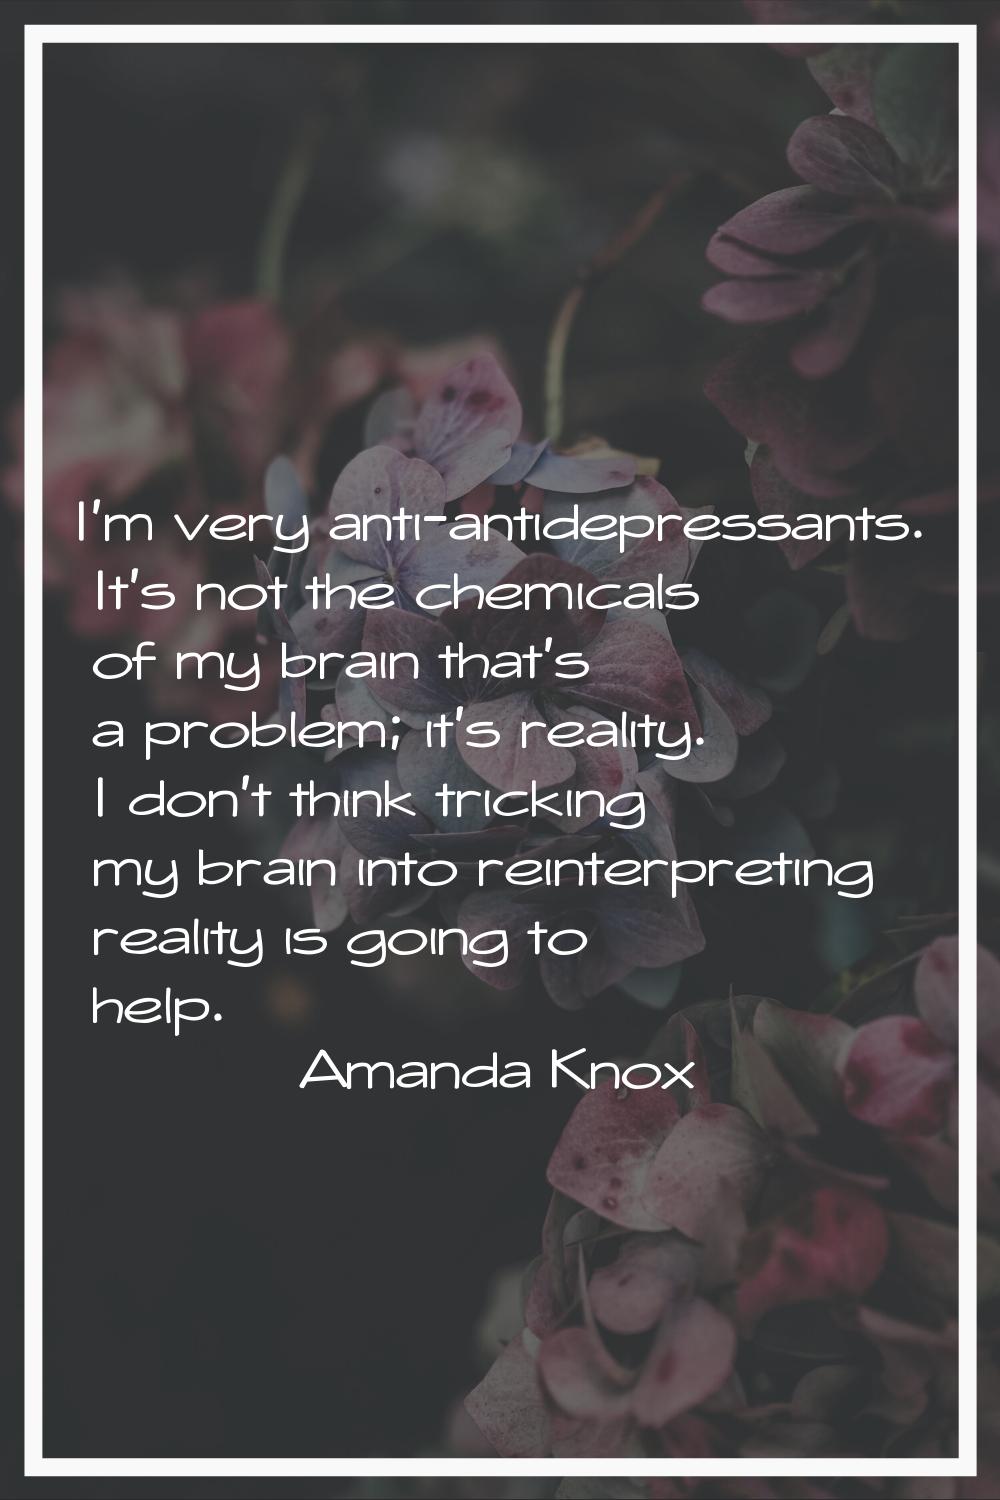 I'm very anti-antidepressants. It's not the chemicals of my brain that's a problem; it's reality. I